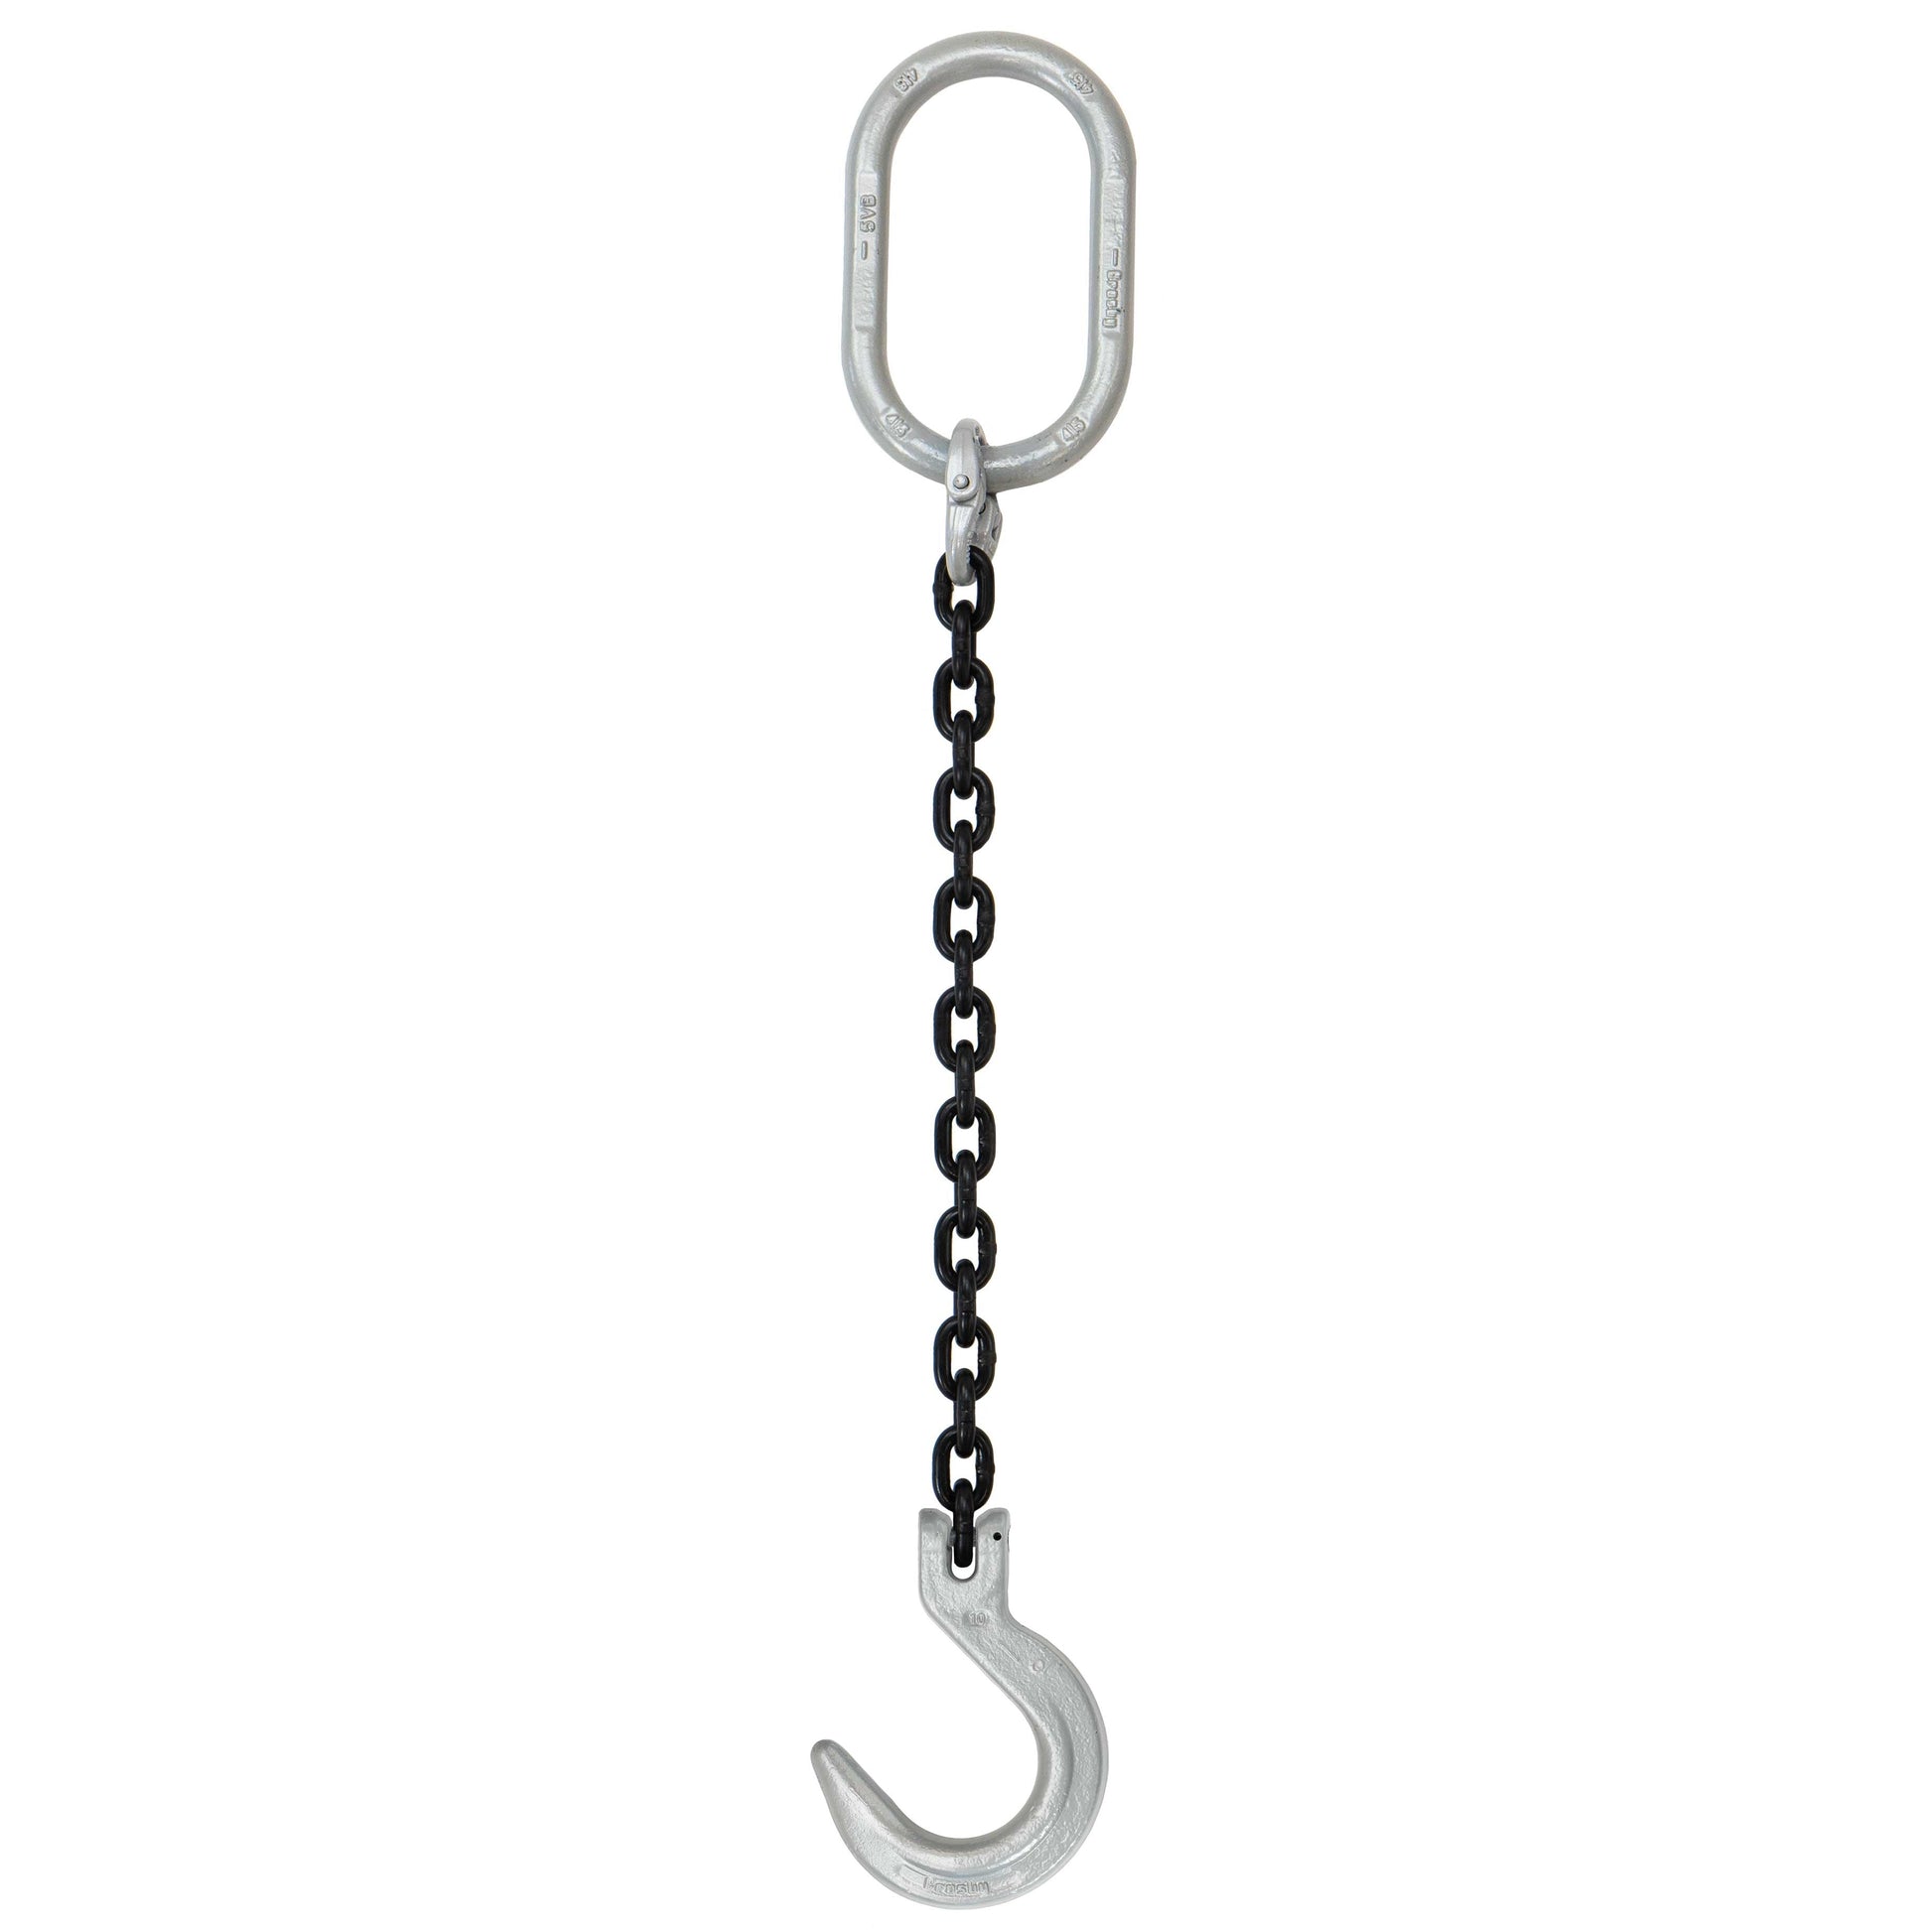 38 inch x 5 foot Domestic Single Leg Chain Sling w Crosby Foundry Hook Grade 100 image 1 of 2